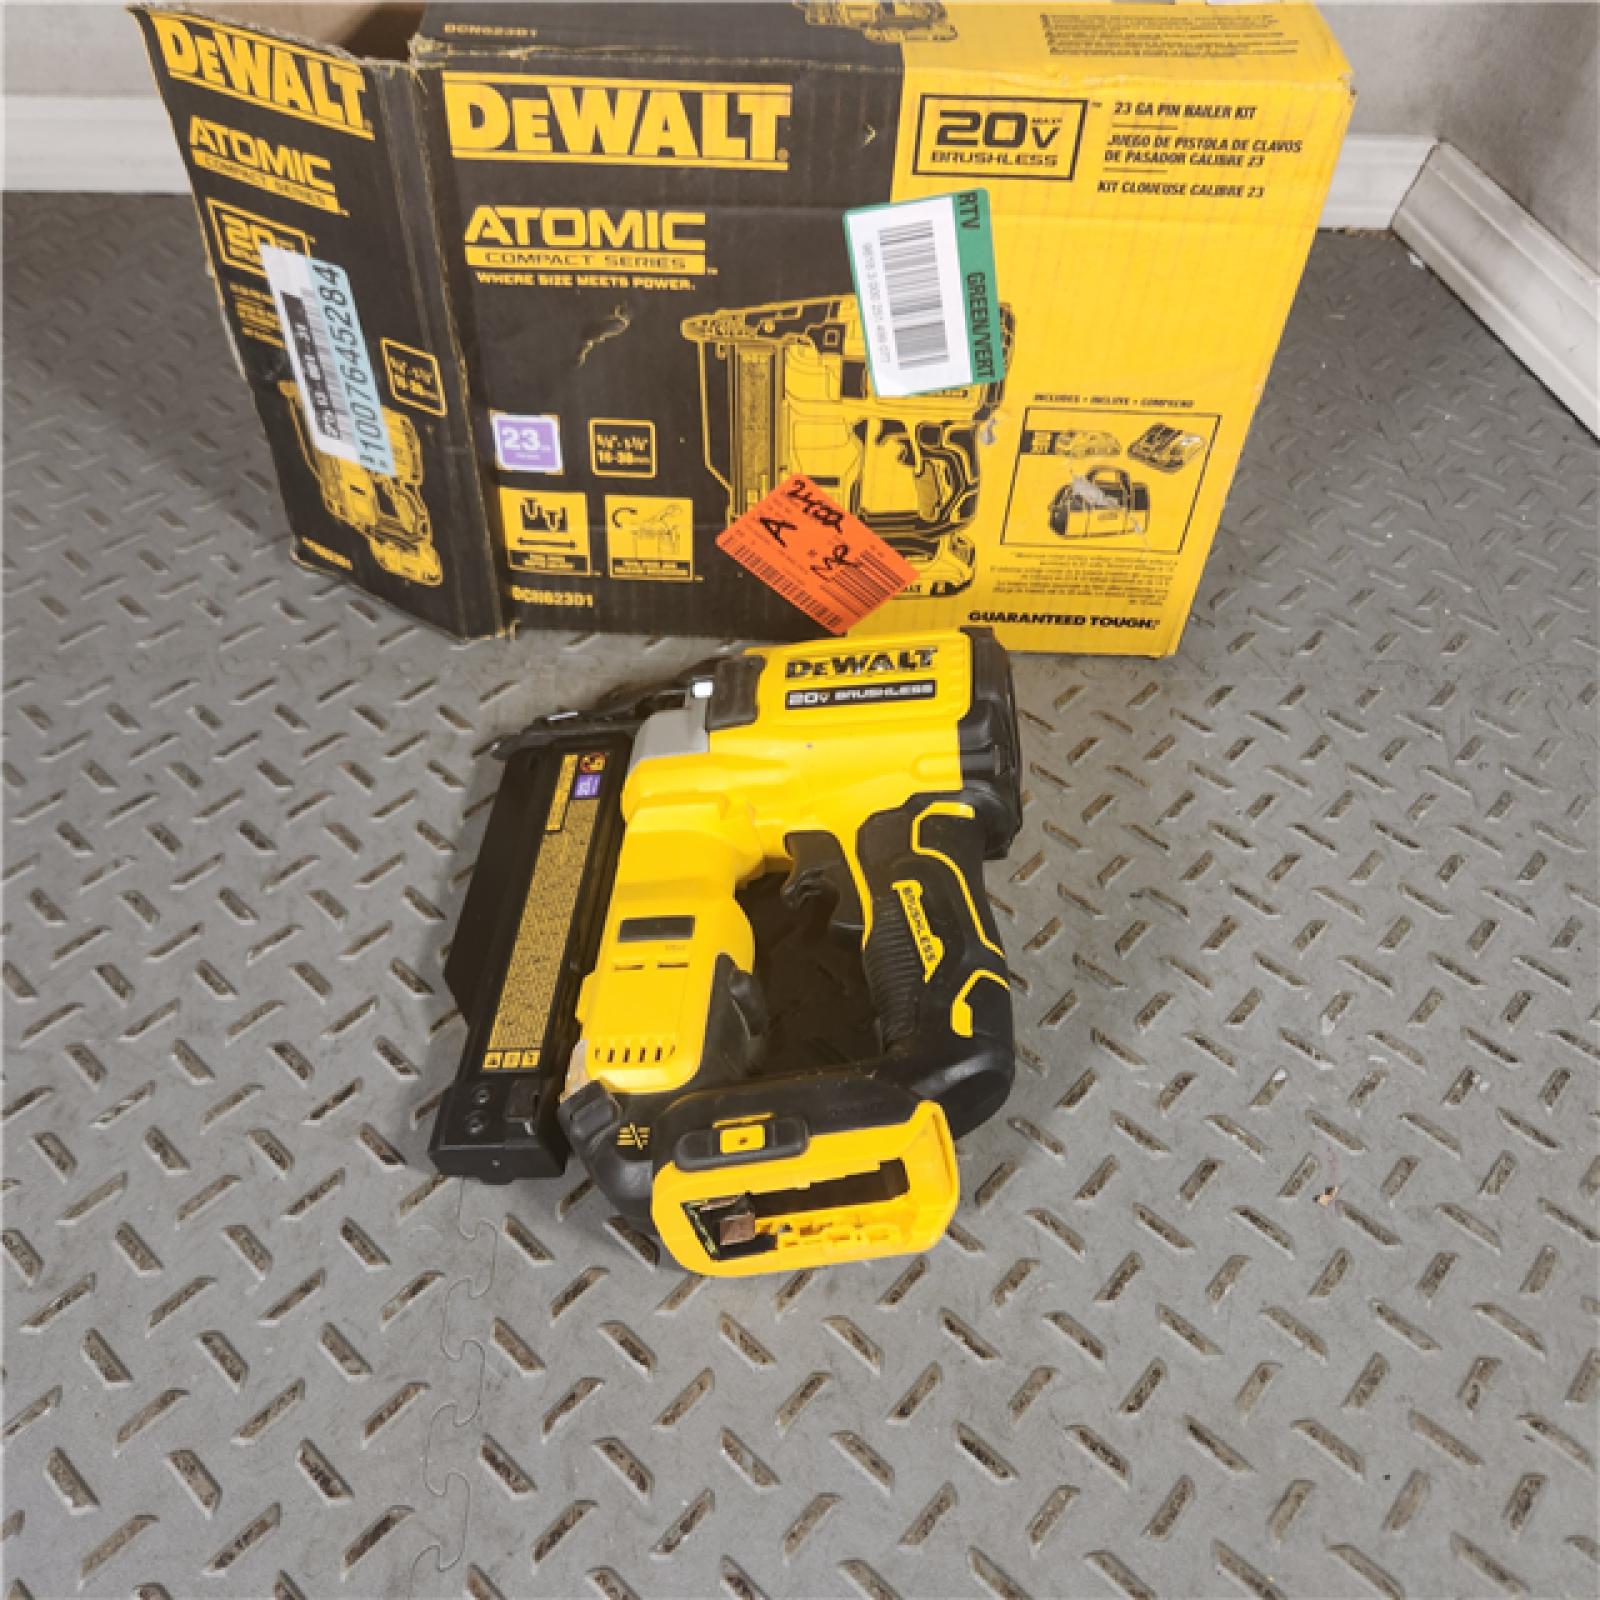 Houston Location - AS-IS DEWALT ATOMIC COMPACT SERIES 20V MAX* Brushless Cordless 23 Ga.Pin Nailer (TOOL ONLY) - Appears IN NEW Condition